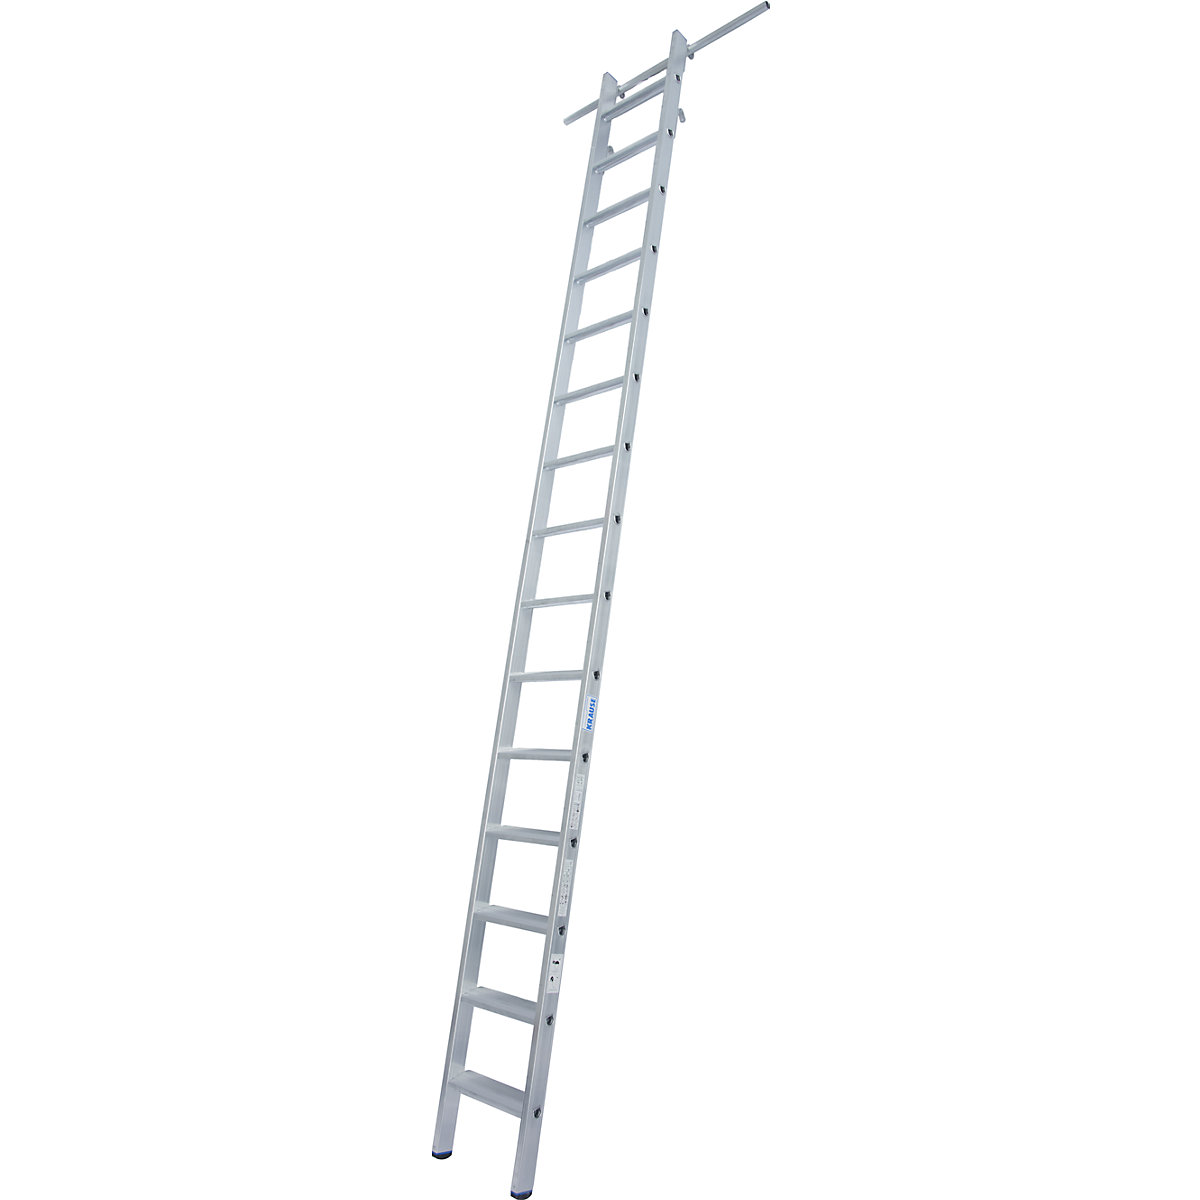 KRAUSE – Step shelf ladder, can be suspended, 2 pairs of suspension hooks, 15 steps